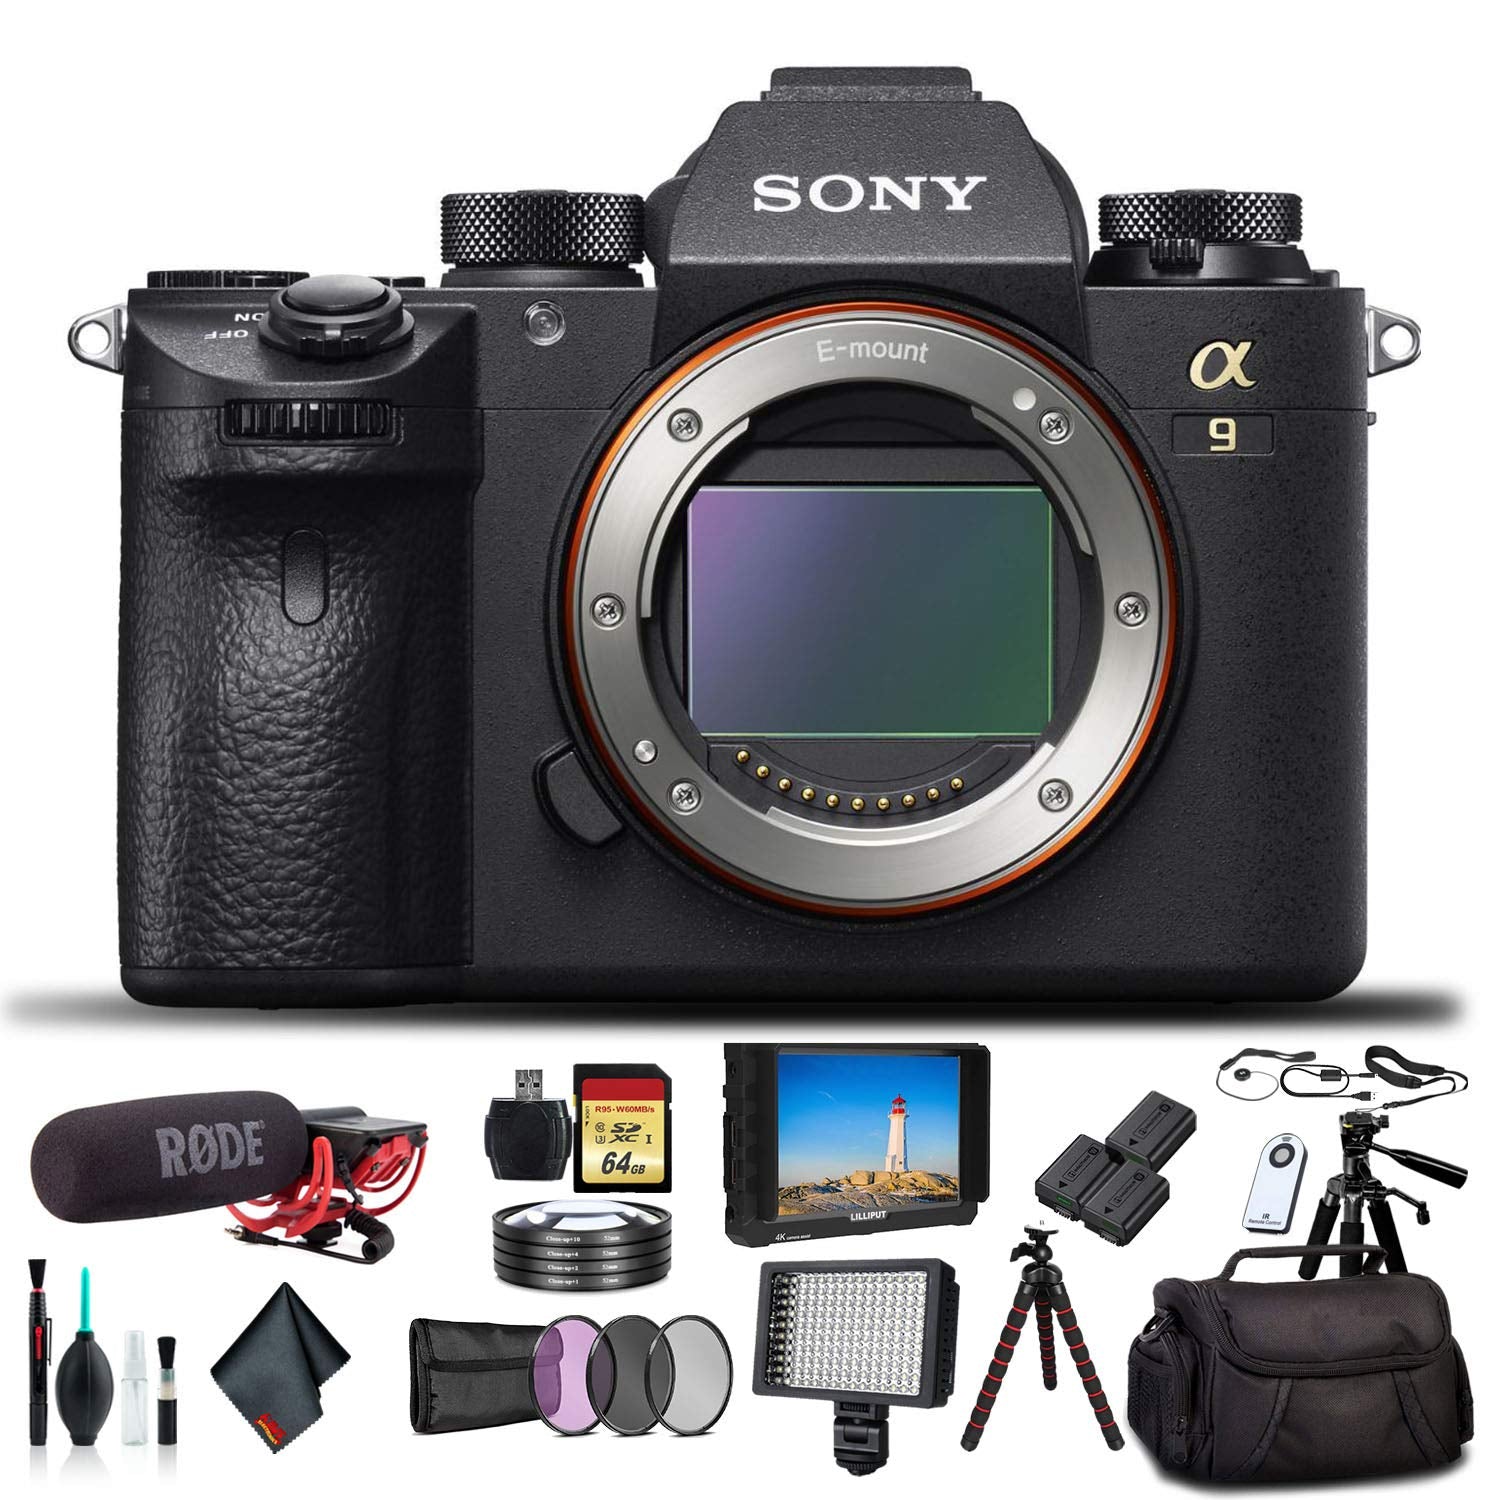 Sony Alpha a9 Mirrorless Camera ILCE9/B With Soft Bag, 2x Extra Batteries, Rode Mic, LED Light, External HD Monitor, 2x 64GB Memory Card, Sling Soft Bag, Card Reader , Plus Essential Accessories